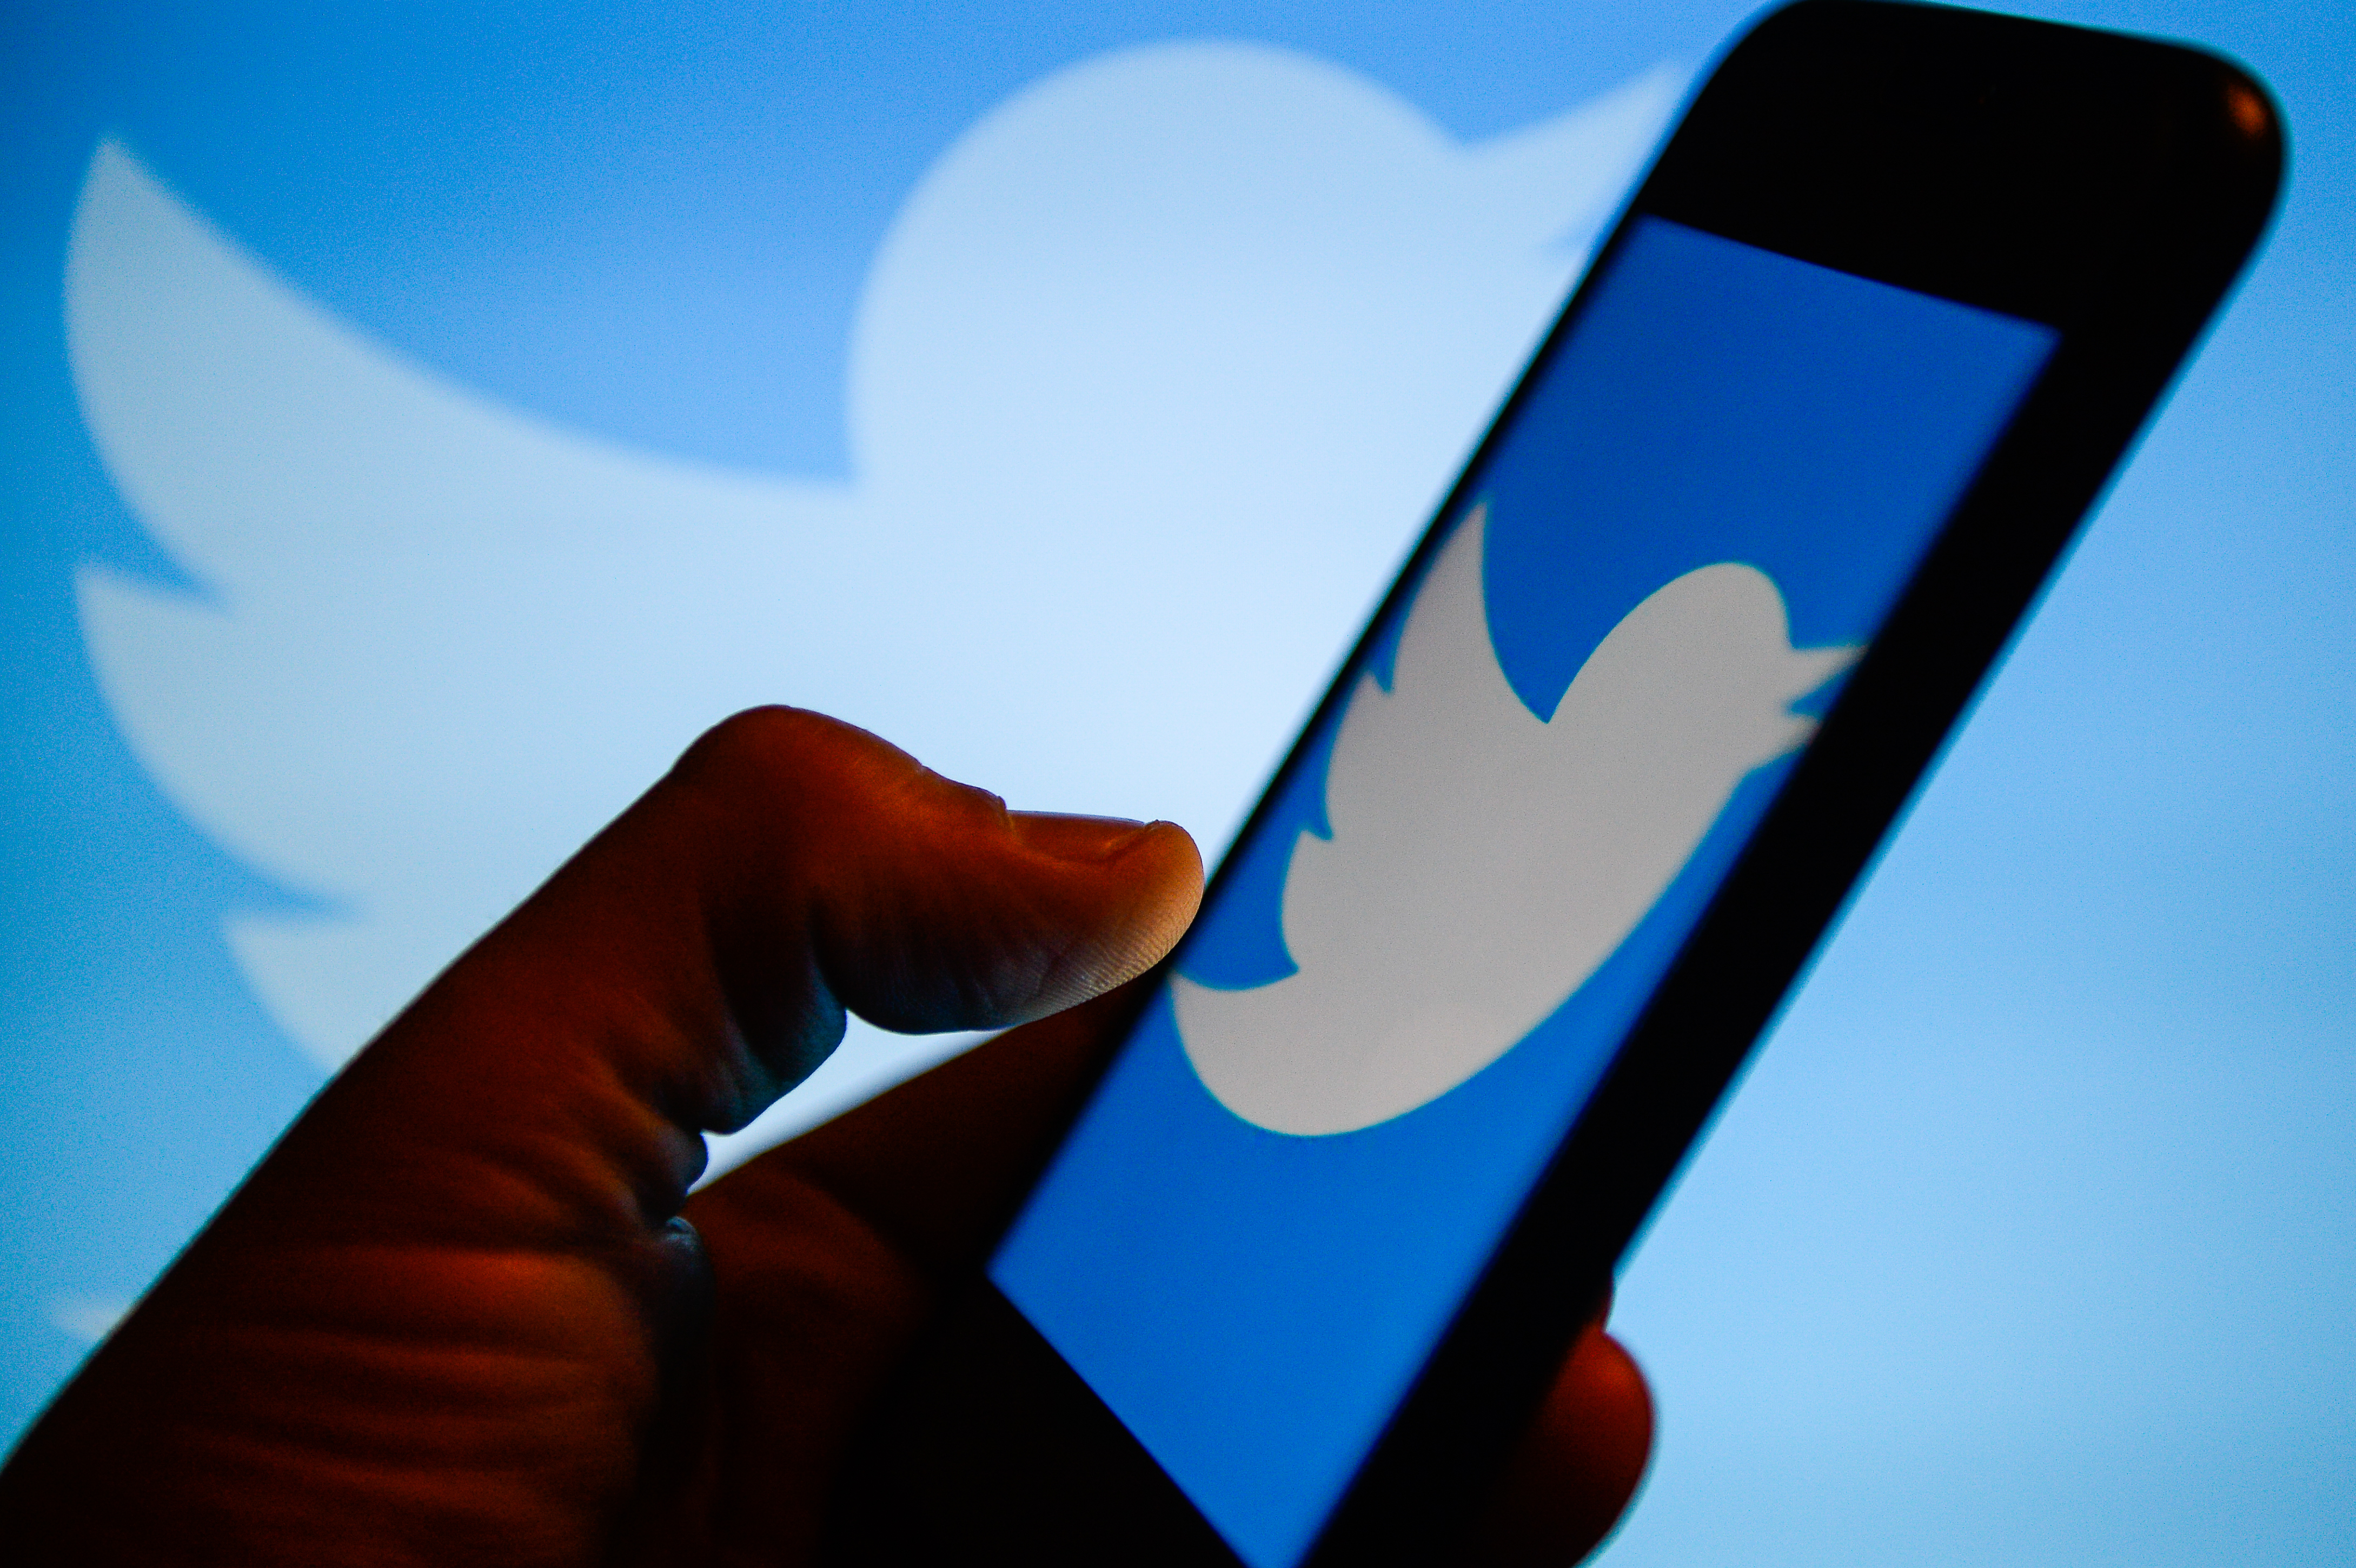 Daily Crunch: Twitter tightens security ahead of election